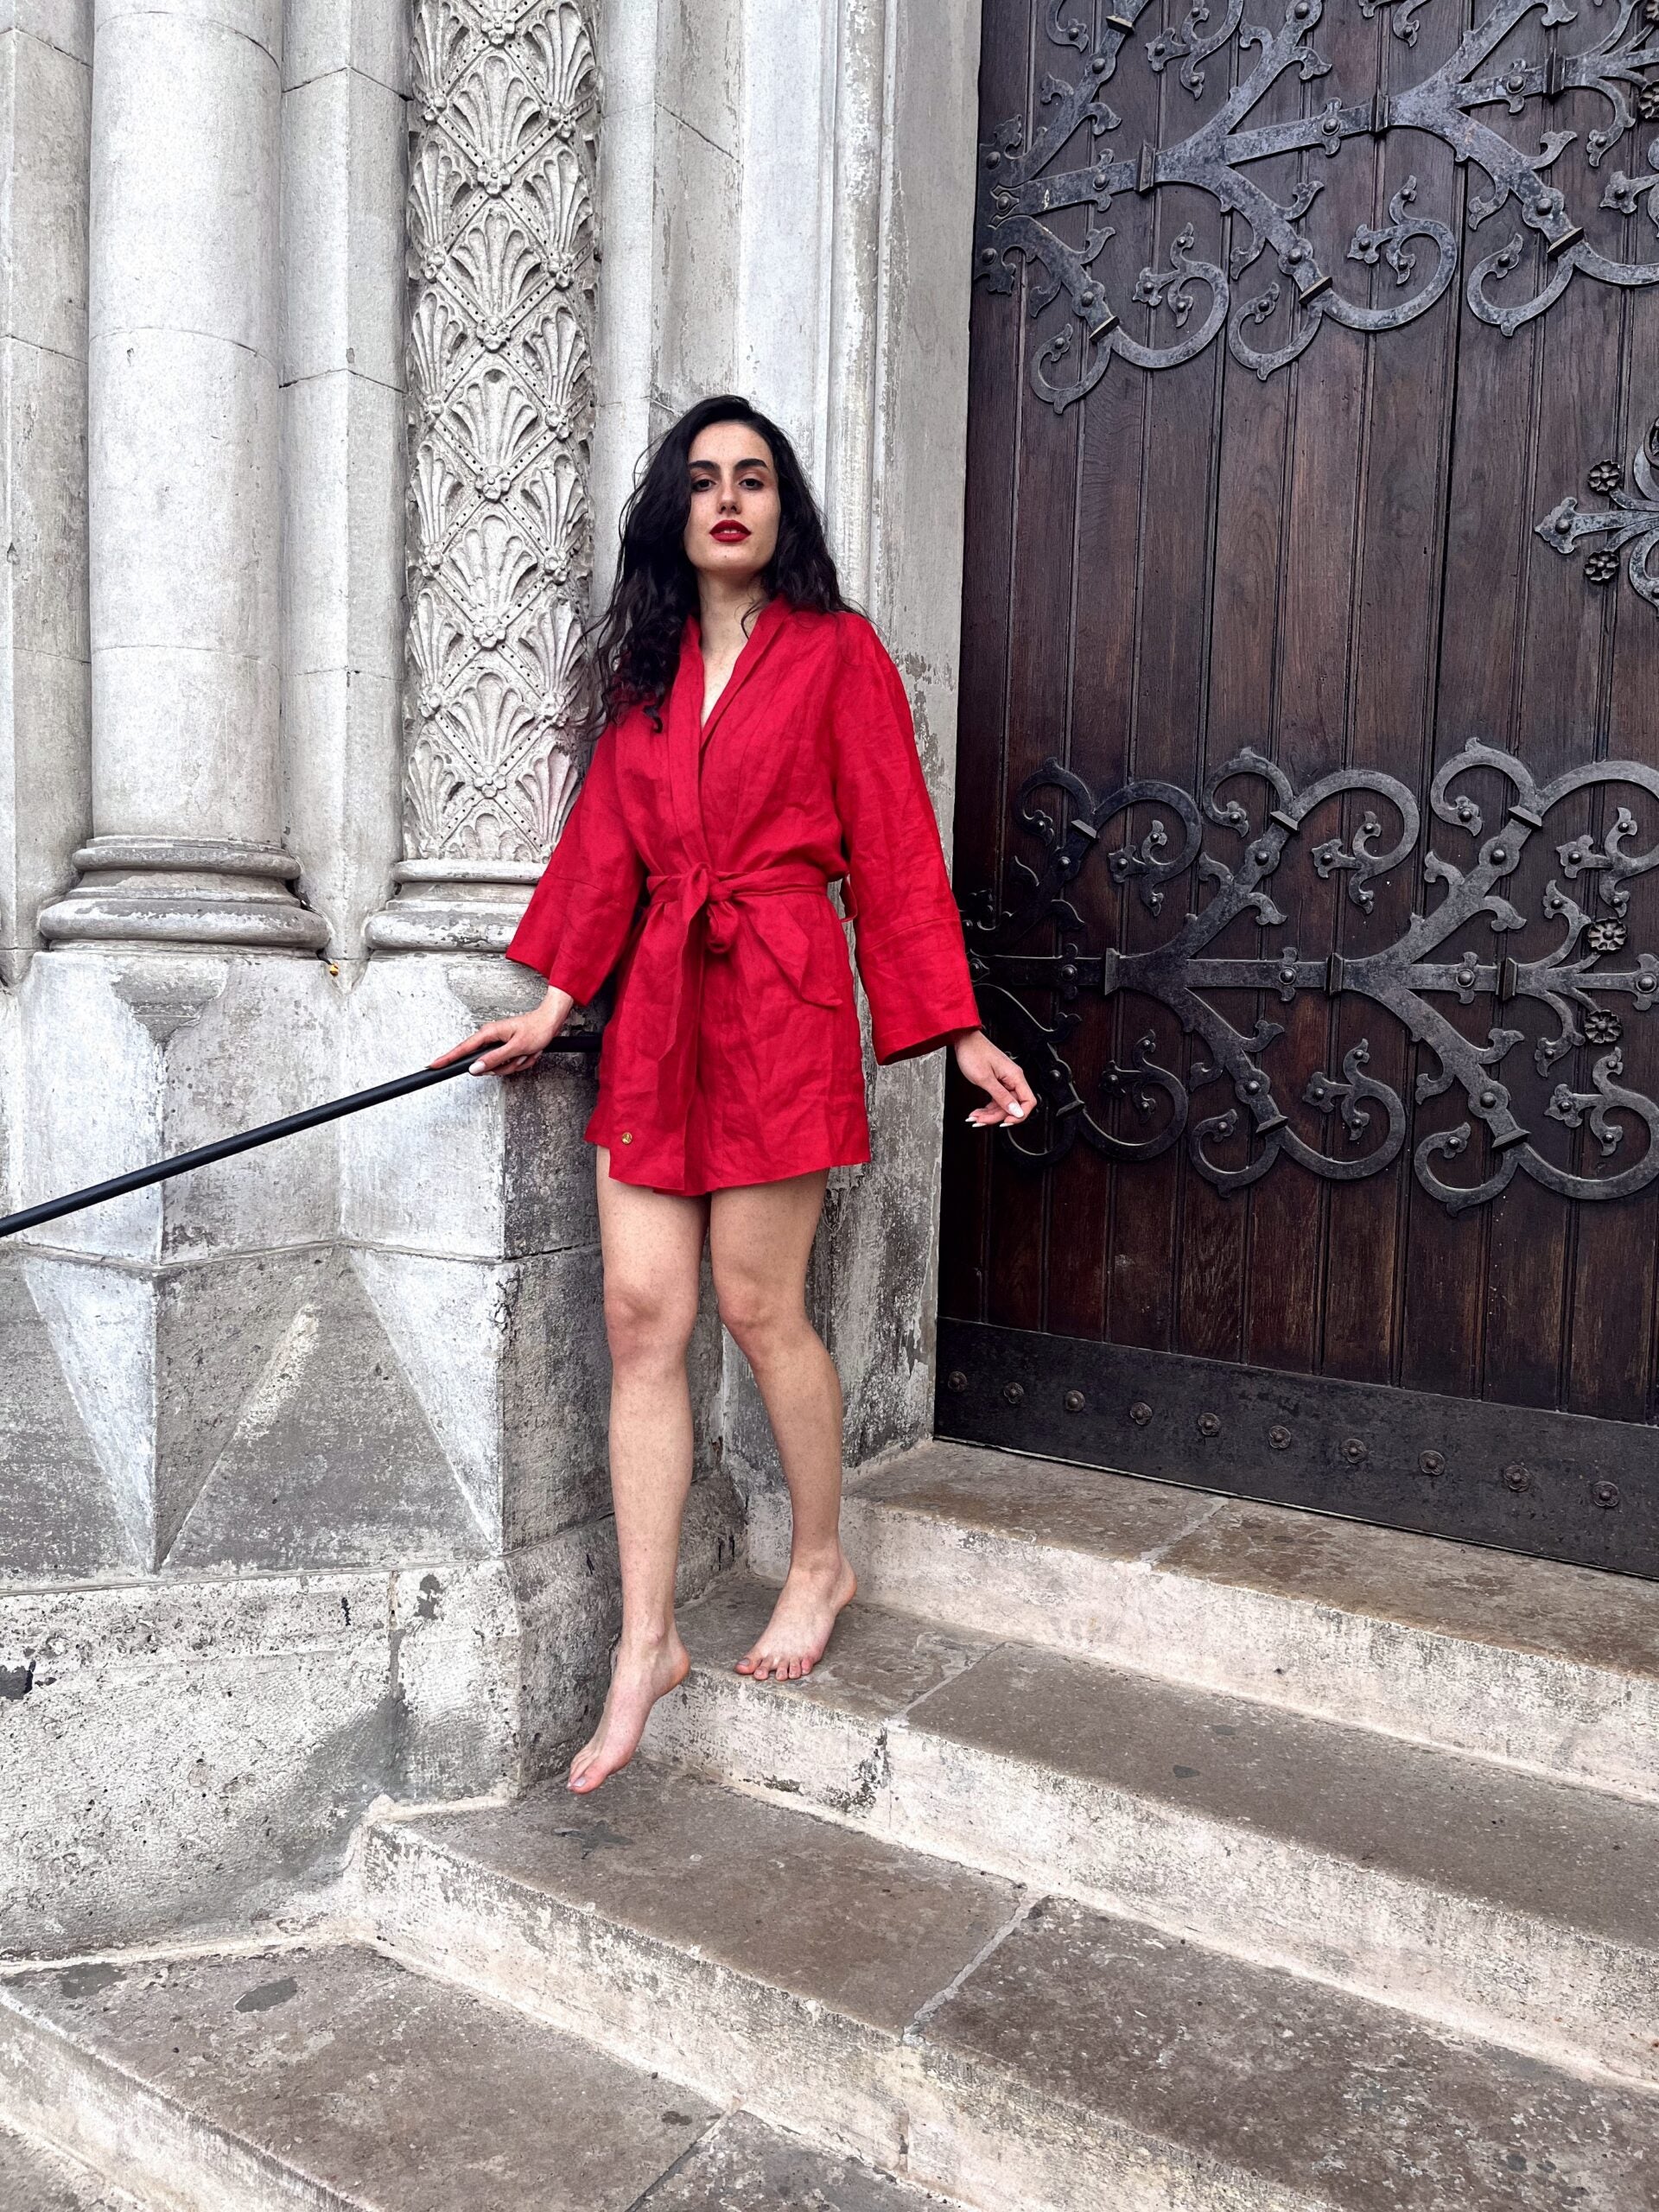 A stylish woman in a vibrant Chery red linen kimono gracefully stands on steps, leaning against a handrailing. Her attire is crafted by a renowned bespoke Linen clothing designer from South Africa.